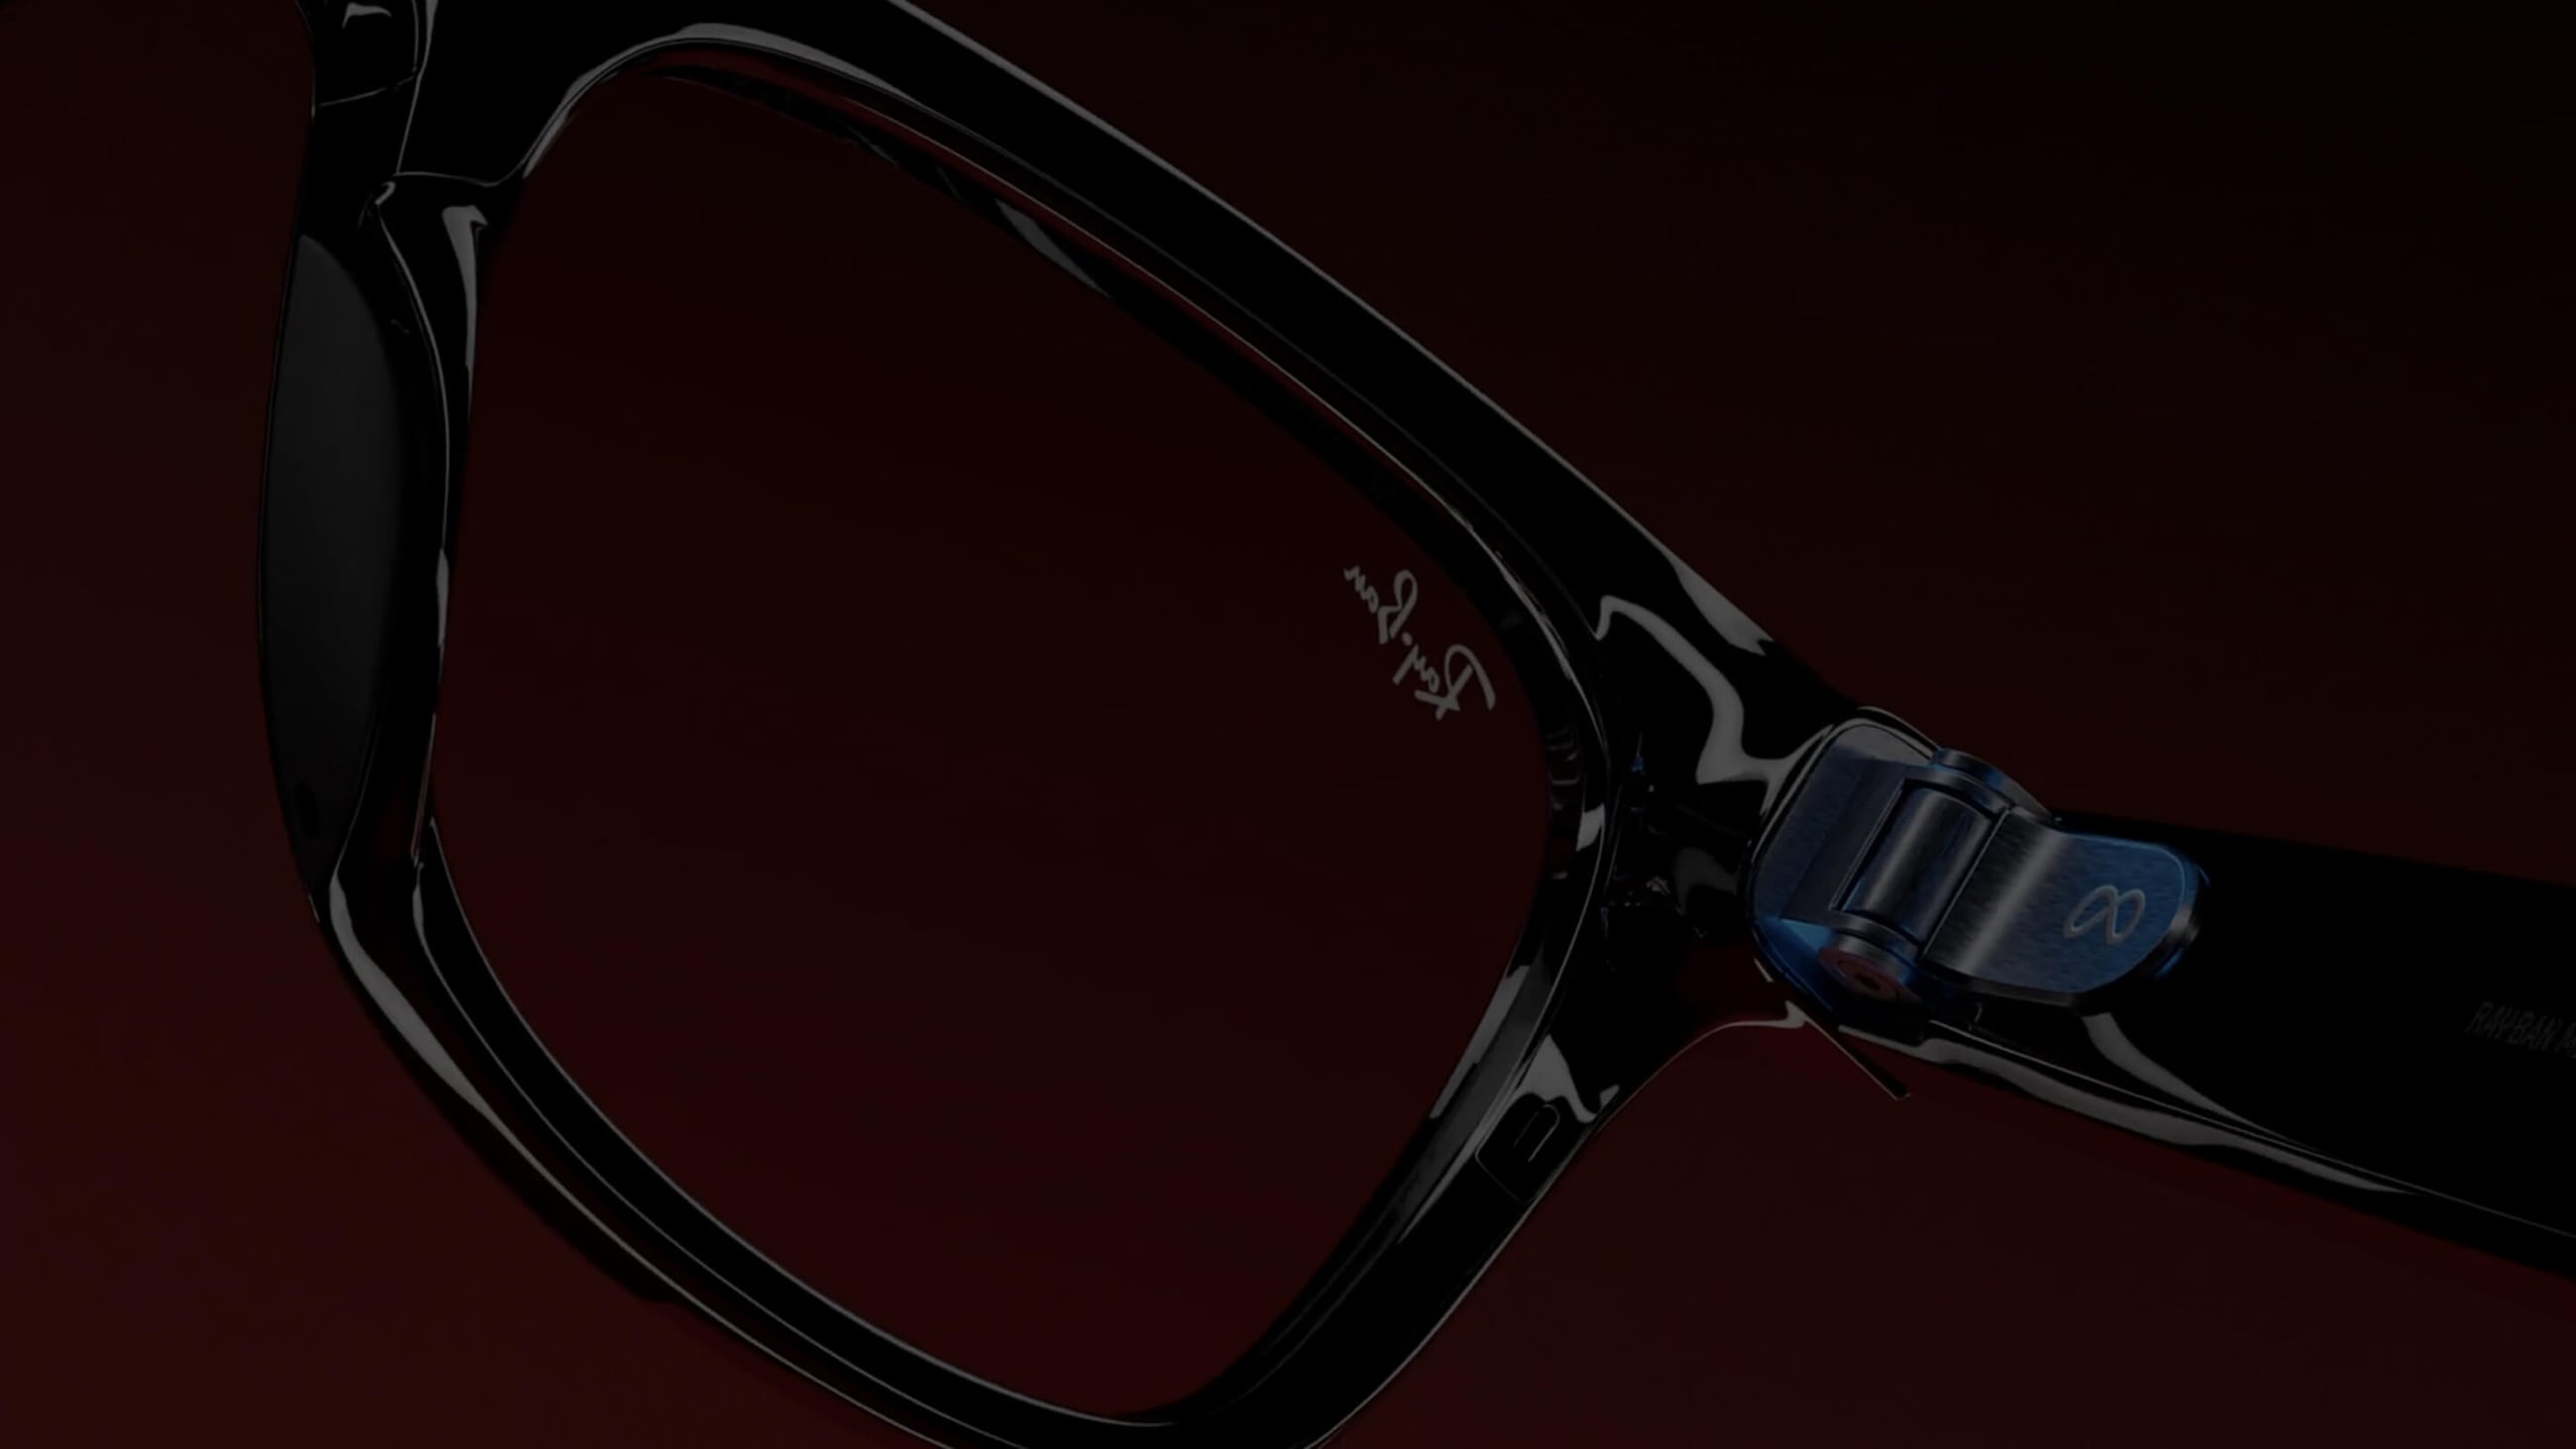 Introducing Ray-Ban Stories: First-Generation Smart Glasses